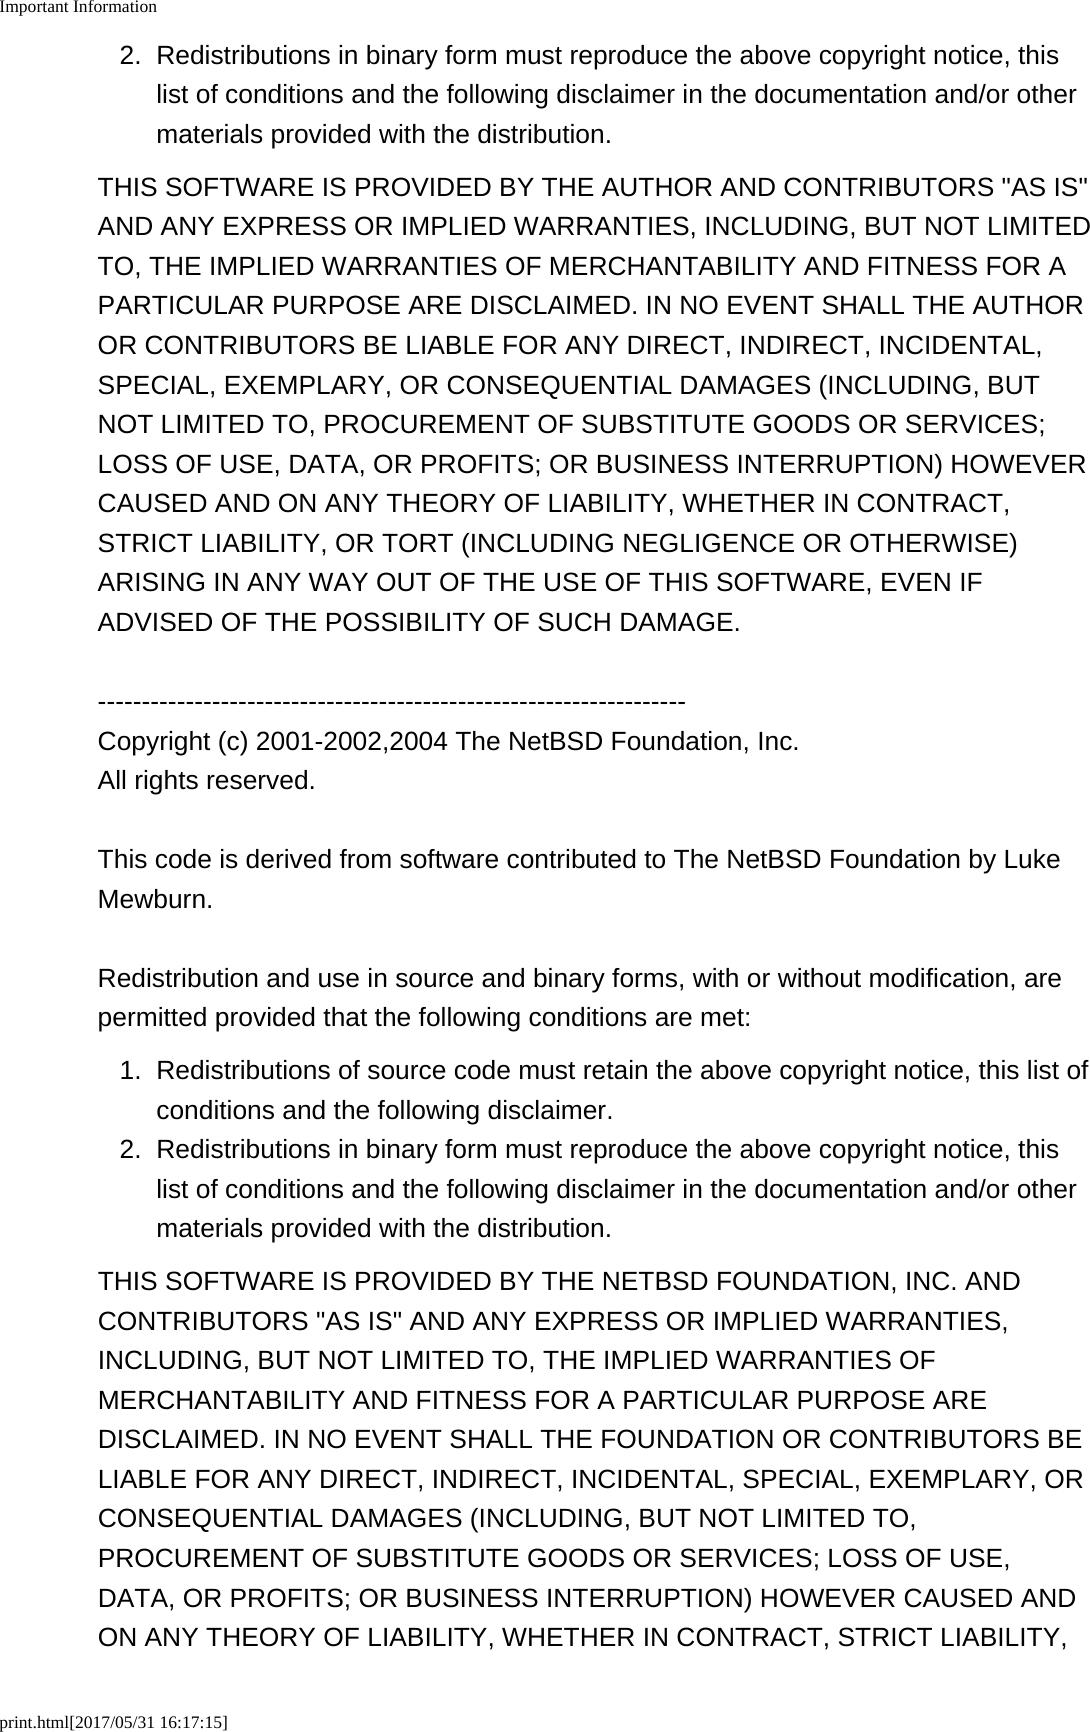 Important Informationprint.html[2017/05/31 16:17:15]2. Redistributions in binary form must reproduce the above copyright notice, thislist of conditions and the following disclaimer in the documentation and/or othermaterials provided with the distribution.THIS SOFTWARE IS PROVIDED BY THE AUTHOR AND CONTRIBUTORS &quot;AS IS&quot;AND ANY EXPRESS OR IMPLIED WARRANTIES, INCLUDING, BUT NOT LIMITEDTO, THE IMPLIED WARRANTIES OF MERCHANTABILITY AND FITNESS FOR APARTICULAR PURPOSE ARE DISCLAIMED. IN NO EVENT SHALL THE AUTHOROR CONTRIBUTORS BE LIABLE FOR ANY DIRECT, INDIRECT, INCIDENTAL,SPECIAL, EXEMPLARY, OR CONSEQUENTIAL DAMAGES (INCLUDING, BUTNOT LIMITED TO, PROCUREMENT OF SUBSTITUTE GOODS OR SERVICES;LOSS OF USE, DATA, OR PROFITS; OR BUSINESS INTERRUPTION) HOWEVERCAUSED AND ON ANY THEORY OF LIABILITY, WHETHER IN CONTRACT,STRICT LIABILITY, OR TORT (INCLUDING NEGLIGENCE OR OTHERWISE)ARISING IN ANY WAY OUT OF THE USE OF THIS SOFTWARE, EVEN IFADVISED OF THE POSSIBILITY OF SUCH DAMAGE.-------------------------------------------------------------------Copyright (c) 2001-2002,2004 The NetBSD Foundation, Inc.All rights reserved.This code is derived from software contributed to The NetBSD Foundation by LukeMewburn.Redistribution and use in source and binary forms, with or without modification, arepermitted provided that the following conditions are met:1. Redistributions of source code must retain the above copyright notice, this list ofconditions and the following disclaimer.2. Redistributions in binary form must reproduce the above copyright notice, thislist of conditions and the following disclaimer in the documentation and/or othermaterials provided with the distribution.THIS SOFTWARE IS PROVIDED BY THE NETBSD FOUNDATION, INC. ANDCONTRIBUTORS &quot;AS IS&quot; AND ANY EXPRESS OR IMPLIED WARRANTIES,INCLUDING, BUT NOT LIMITED TO, THE IMPLIED WARRANTIES OFMERCHANTABILITY AND FITNESS FOR A PARTICULAR PURPOSE AREDISCLAIMED. IN NO EVENT SHALL THE FOUNDATION OR CONTRIBUTORS BELIABLE FOR ANY DIRECT, INDIRECT, INCIDENTAL, SPECIAL, EXEMPLARY, ORCONSEQUENTIAL DAMAGES (INCLUDING, BUT NOT LIMITED TO,PROCUREMENT OF SUBSTITUTE GOODS OR SERVICES; LOSS OF USE,DATA, OR PROFITS; OR BUSINESS INTERRUPTION) HOWEVER CAUSED ANDON ANY THEORY OF LIABILITY, WHETHER IN CONTRACT, STRICT LIABILITY,